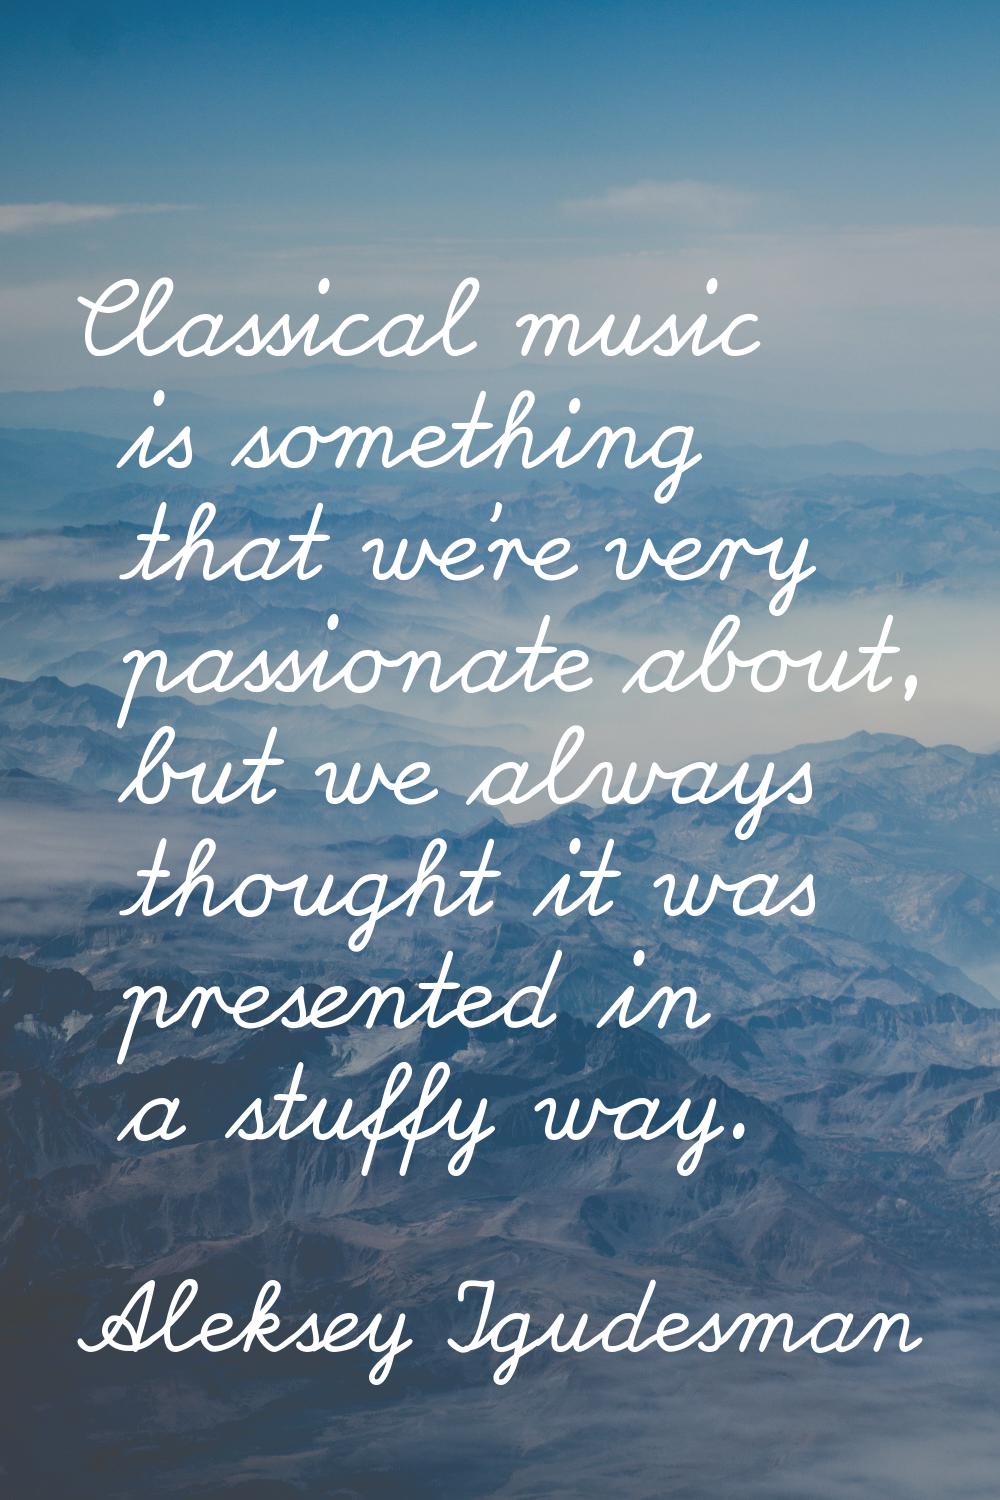 Classical music is something that we're very passionate about, but we always thought it was present